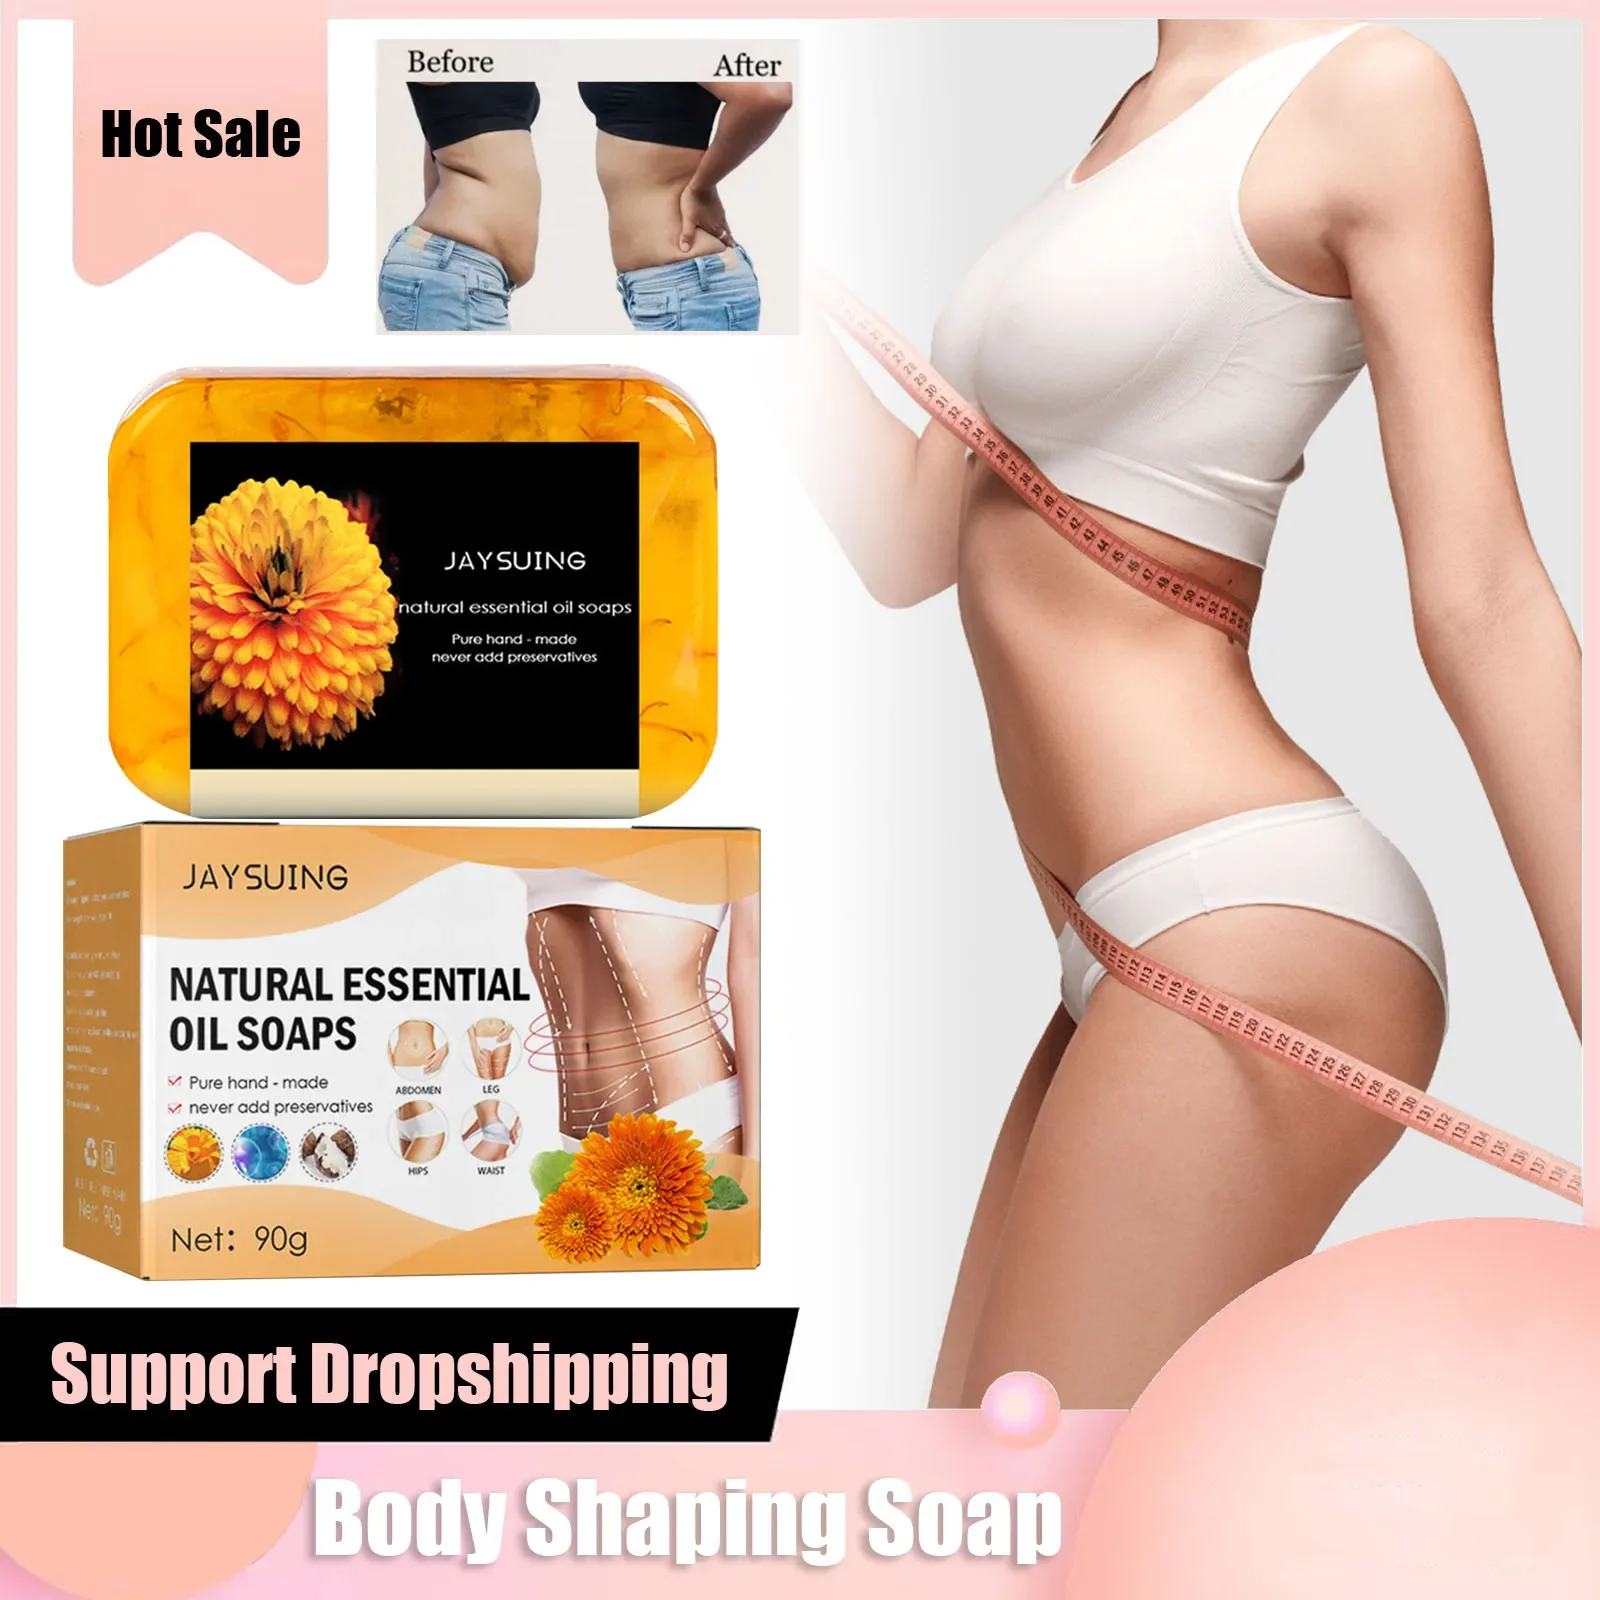 

Anti Cellulite Firming Soap Anti Swelling Weight Loss Slimming Detox Fat Burning Body Shaping Massage Spa Deep Cleansing Soap